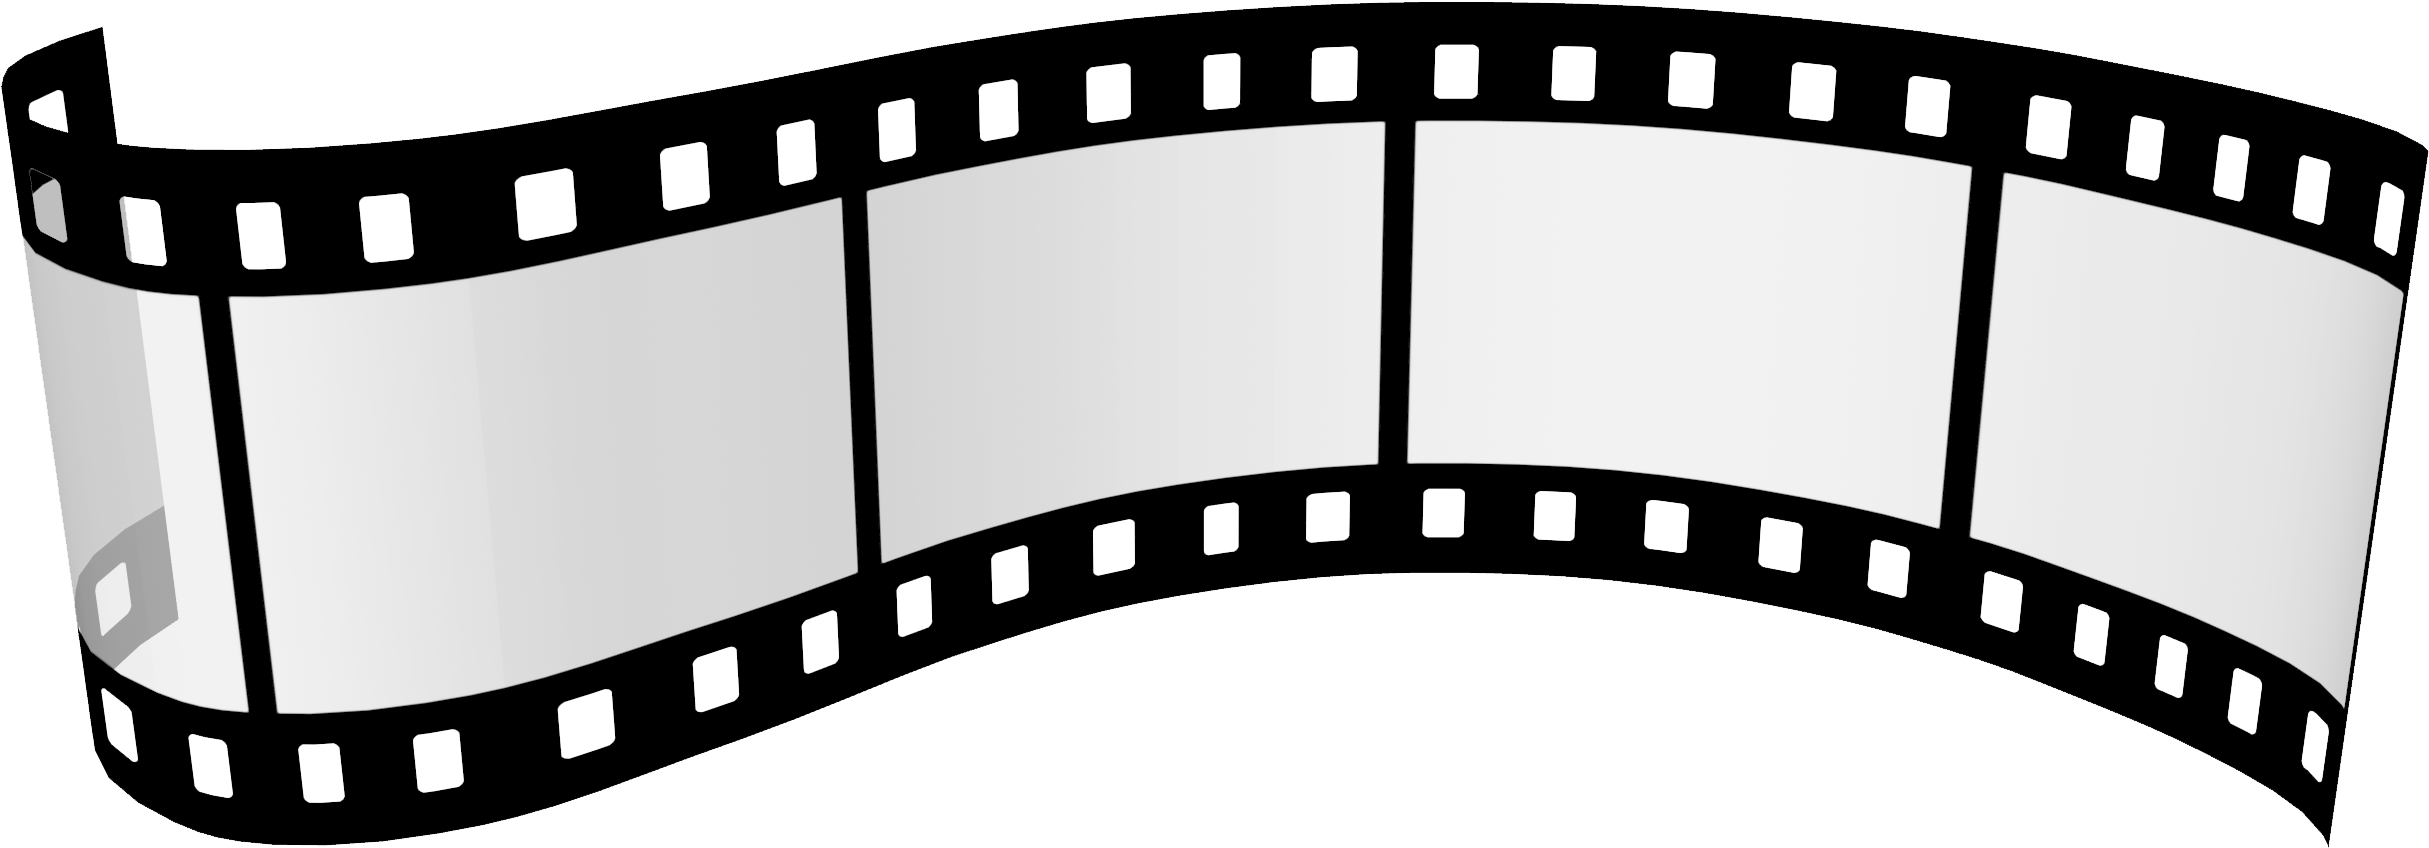 A Film Strip With A White Screen